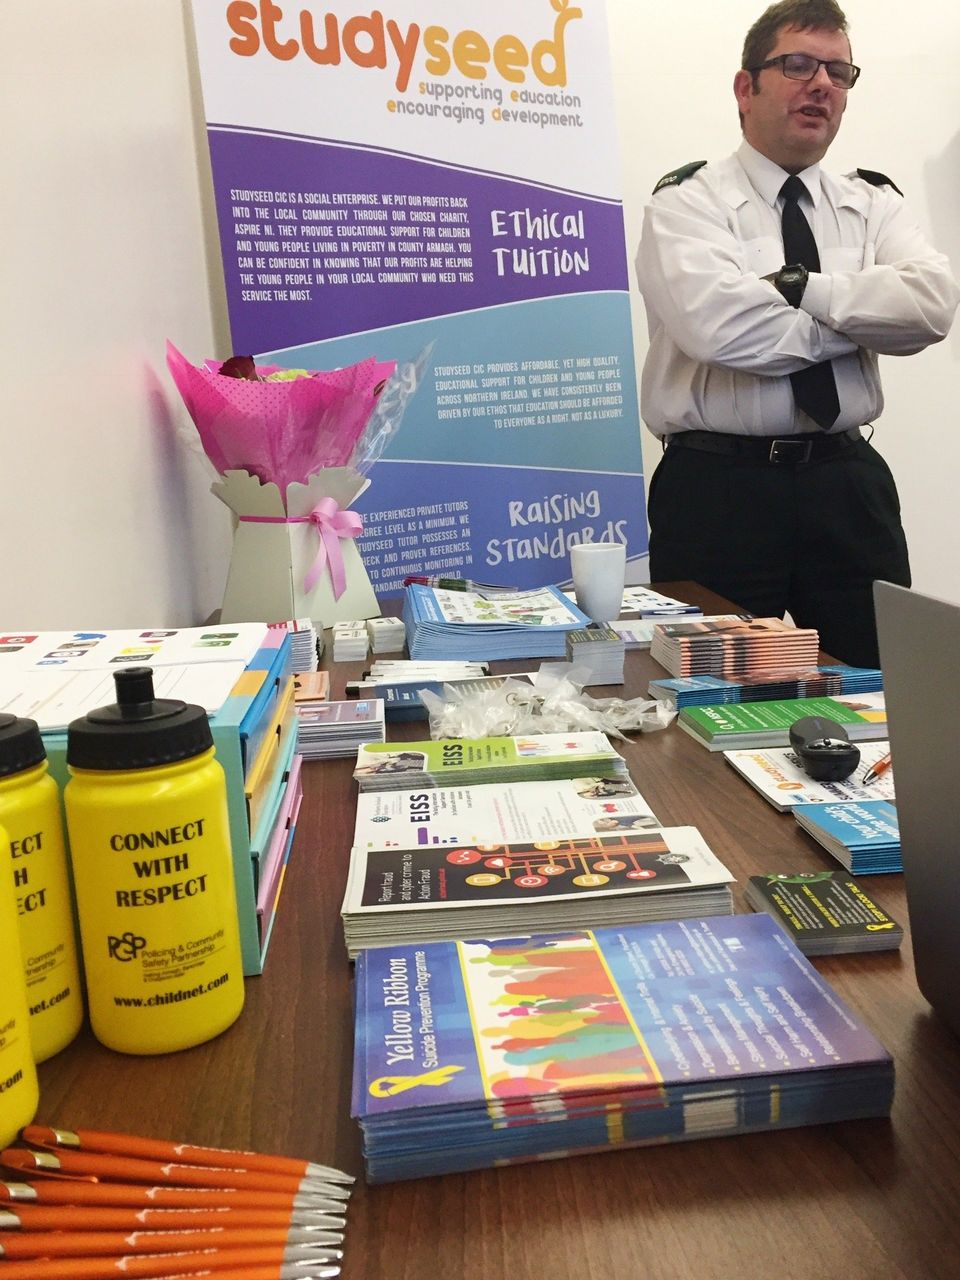 Studyseed CIC - Constable Gary from Craigavon PSNI with literature on child safety and wellbeing